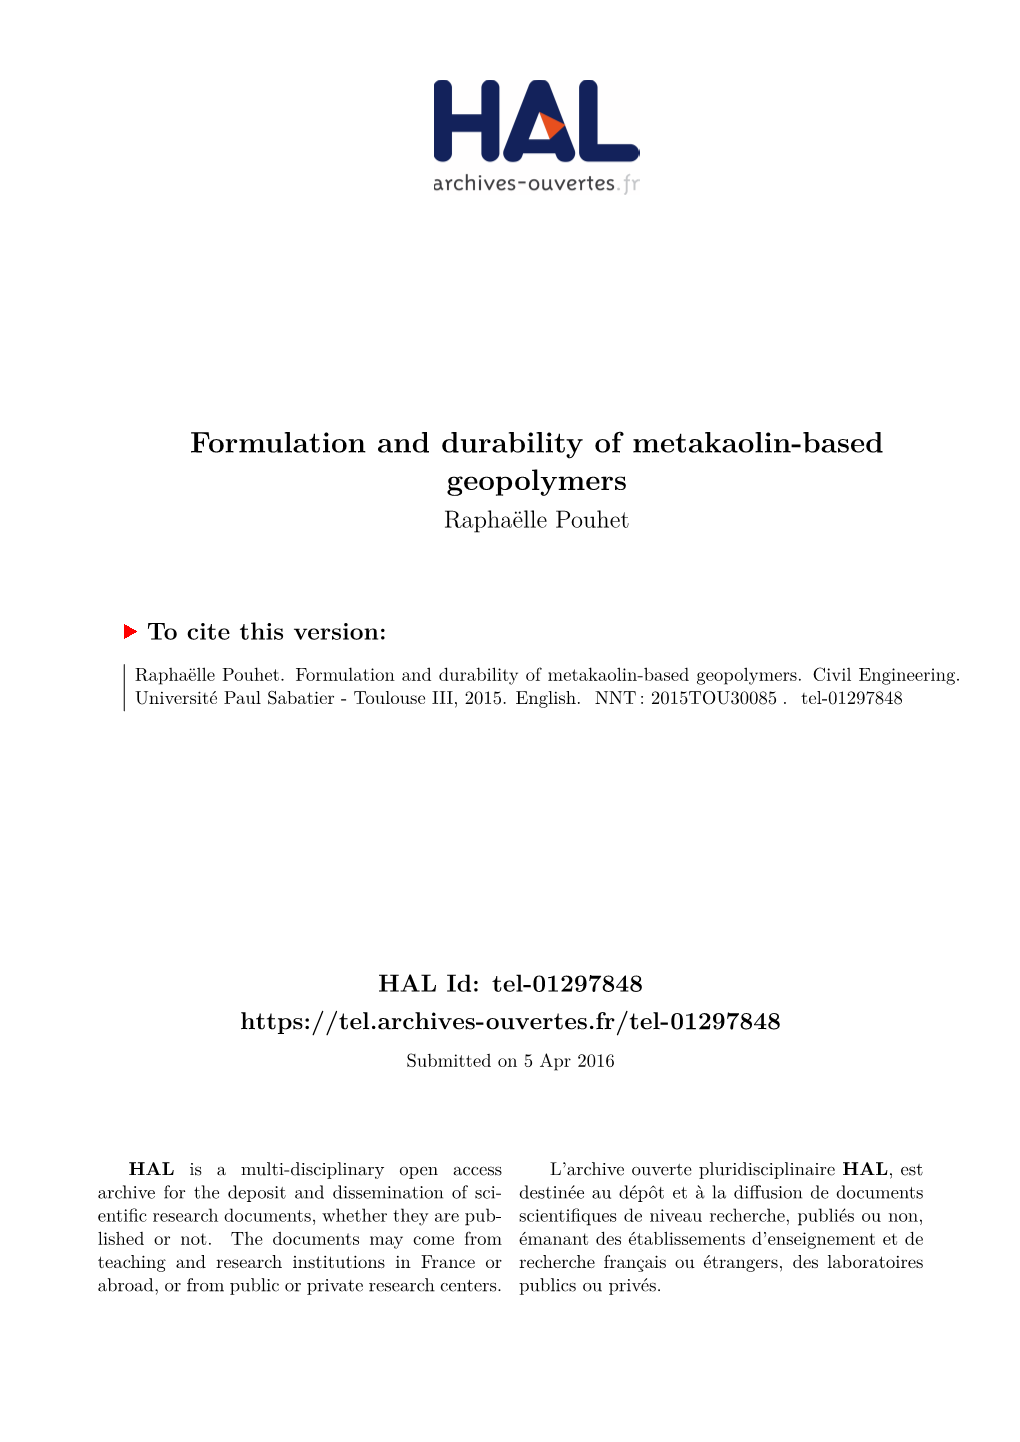 Formulation and Durability of Metakaolin-Based Geopolymers Raphaëlle Pouhet